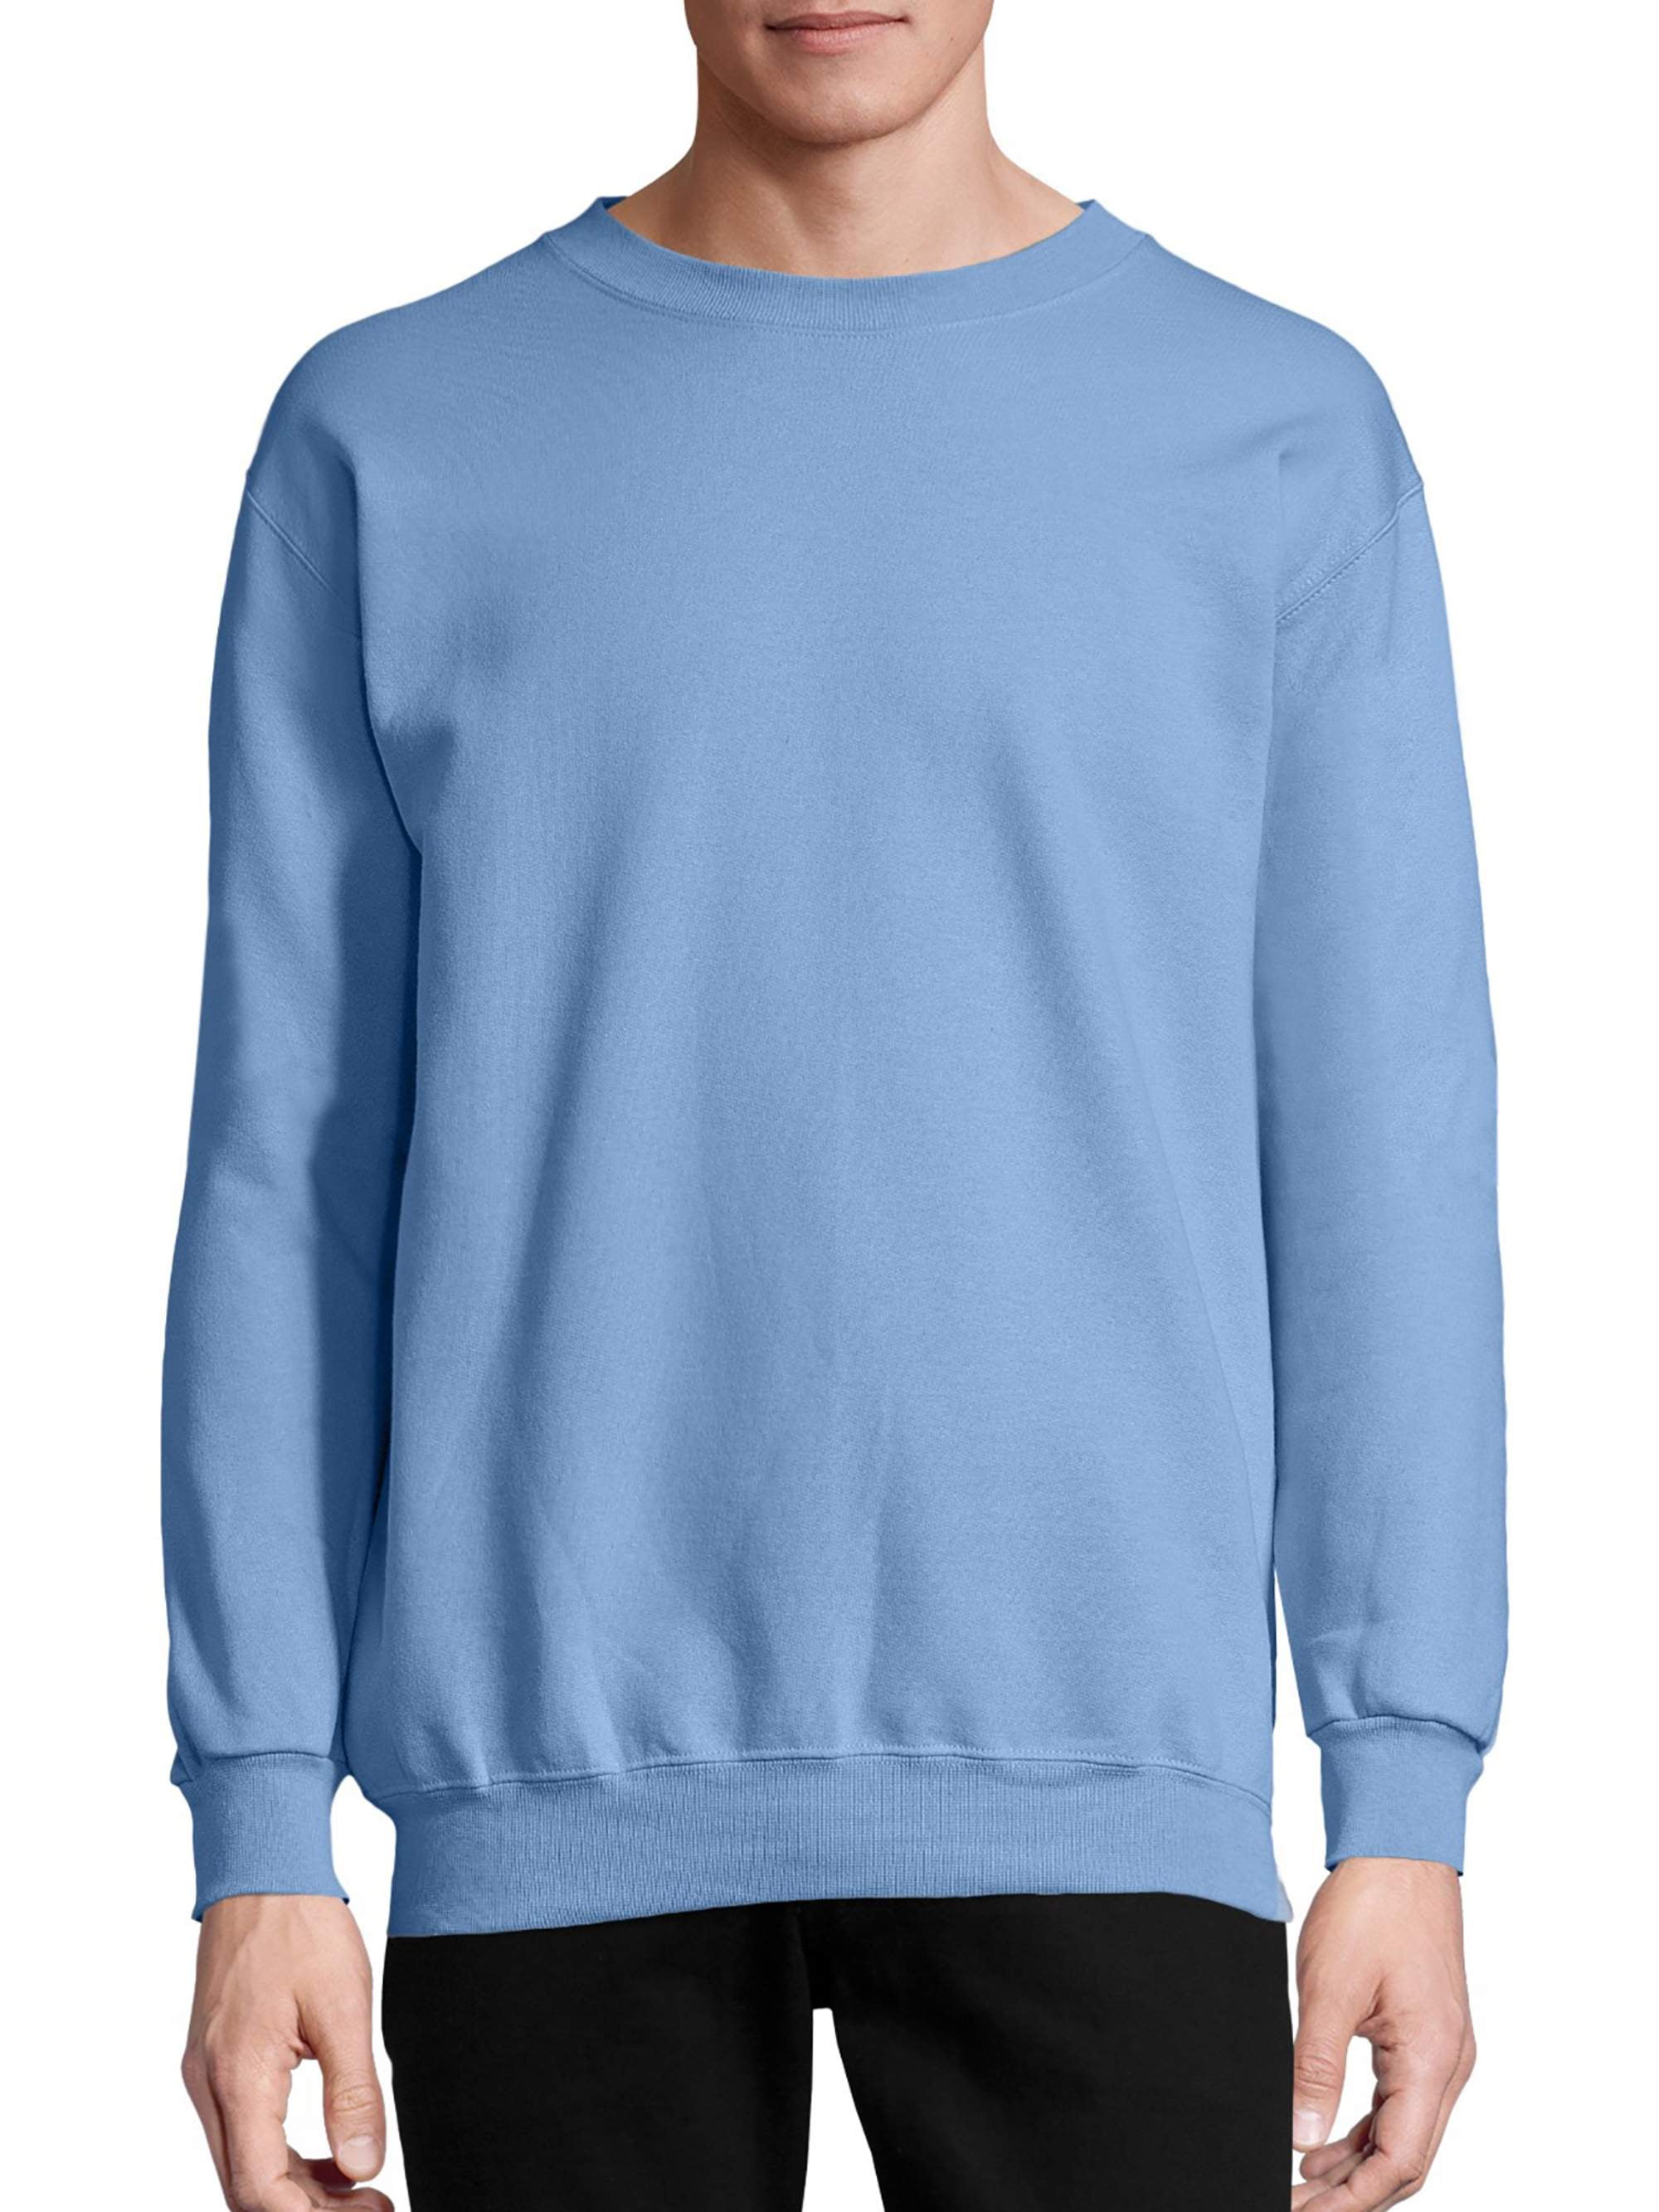 Top of the World Mens Heavy Weight Pullover Crewneck Fleece Sweater